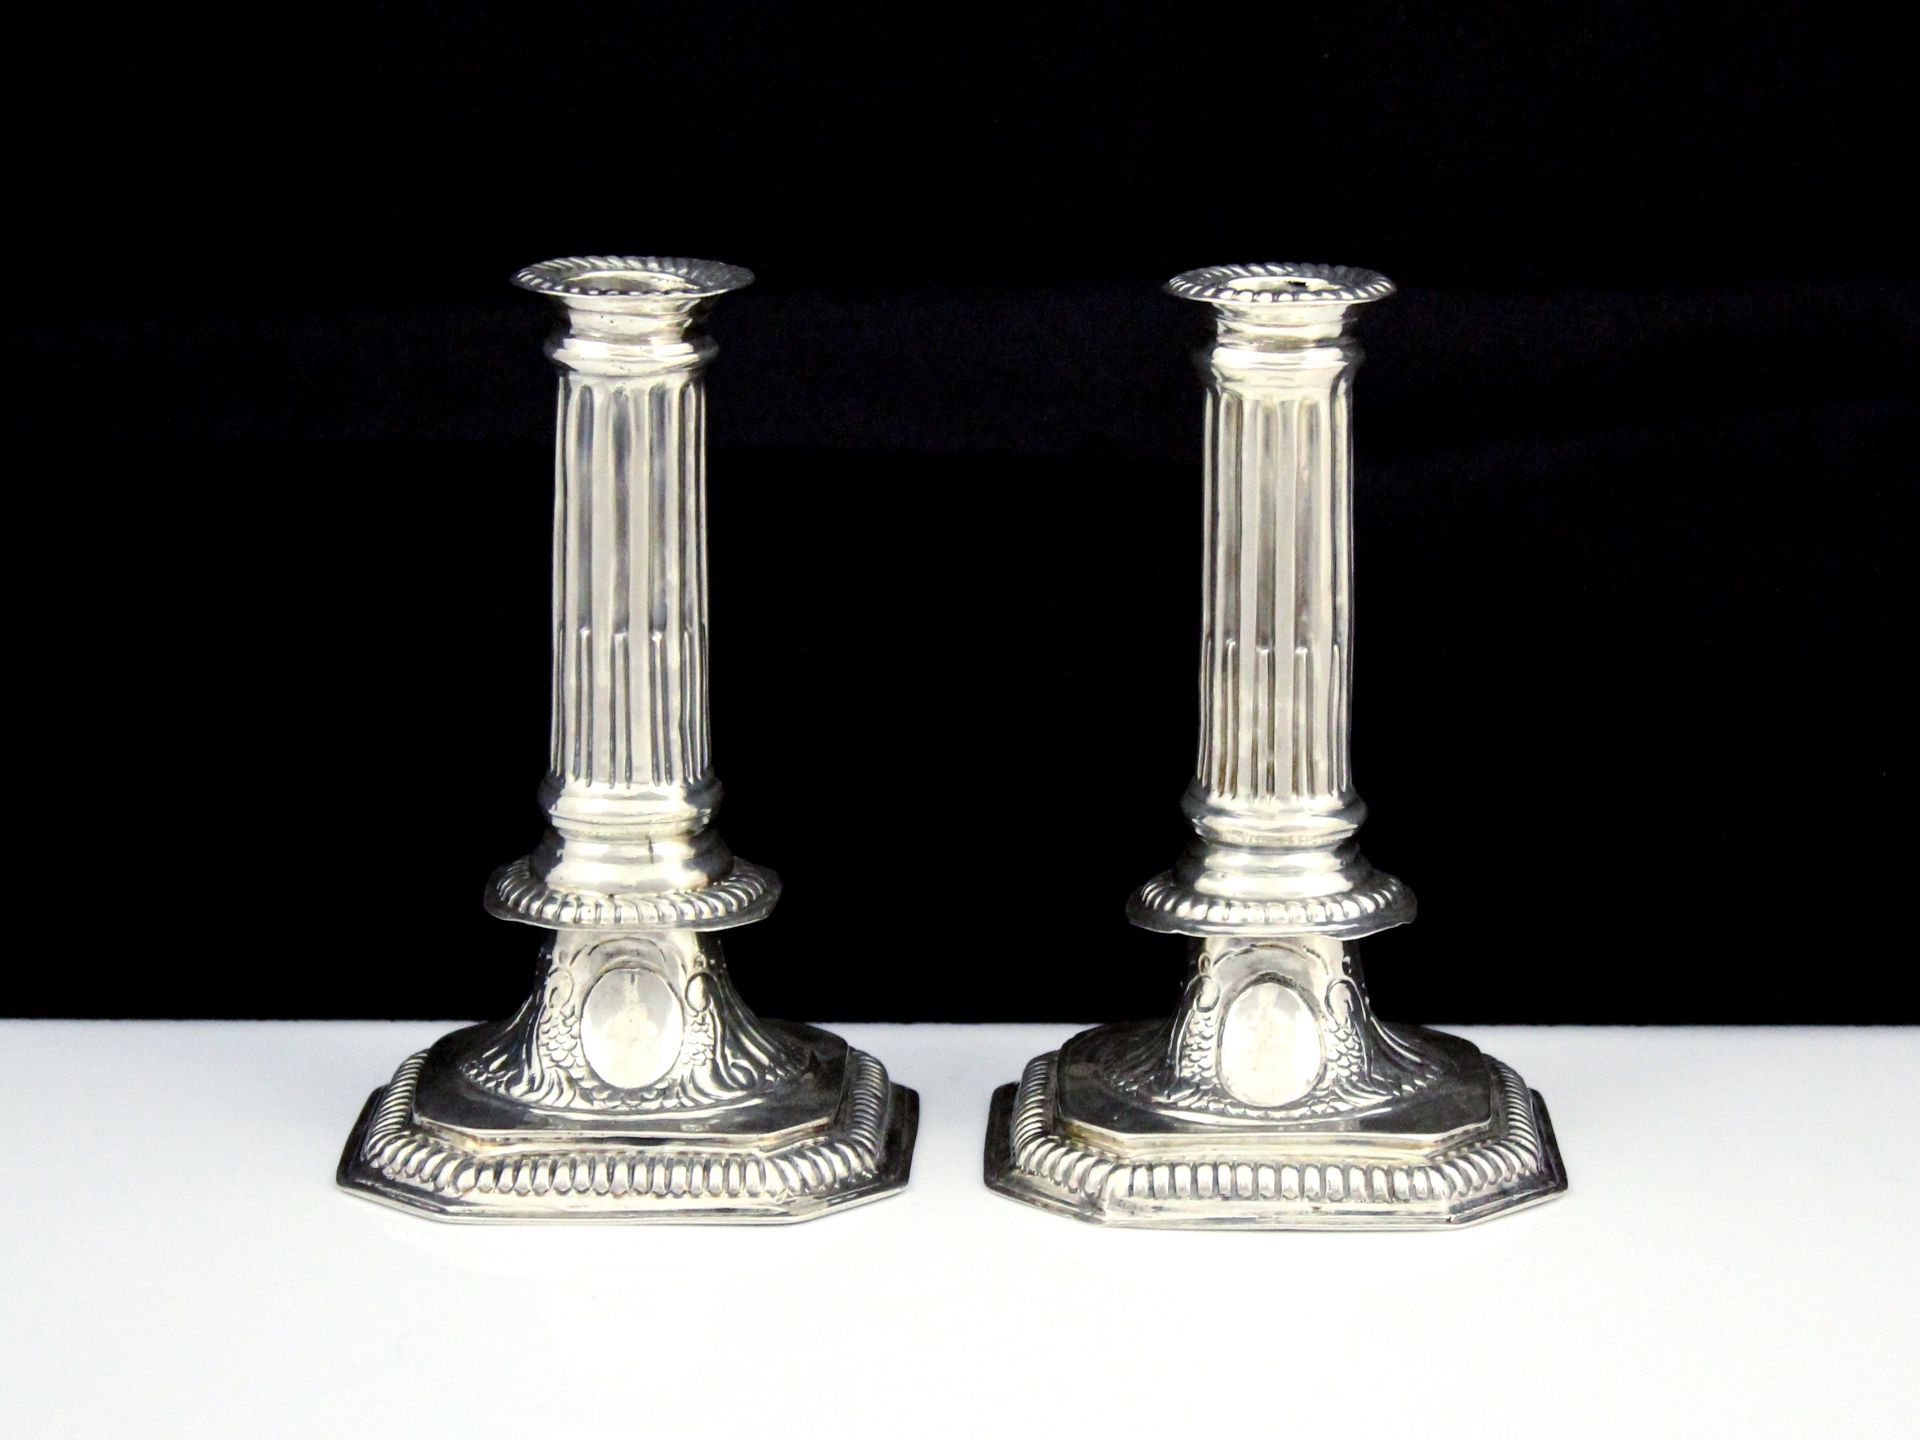 A pair of antique William III Britannia Silver candlesticks by Charles Overing, London 1697. The